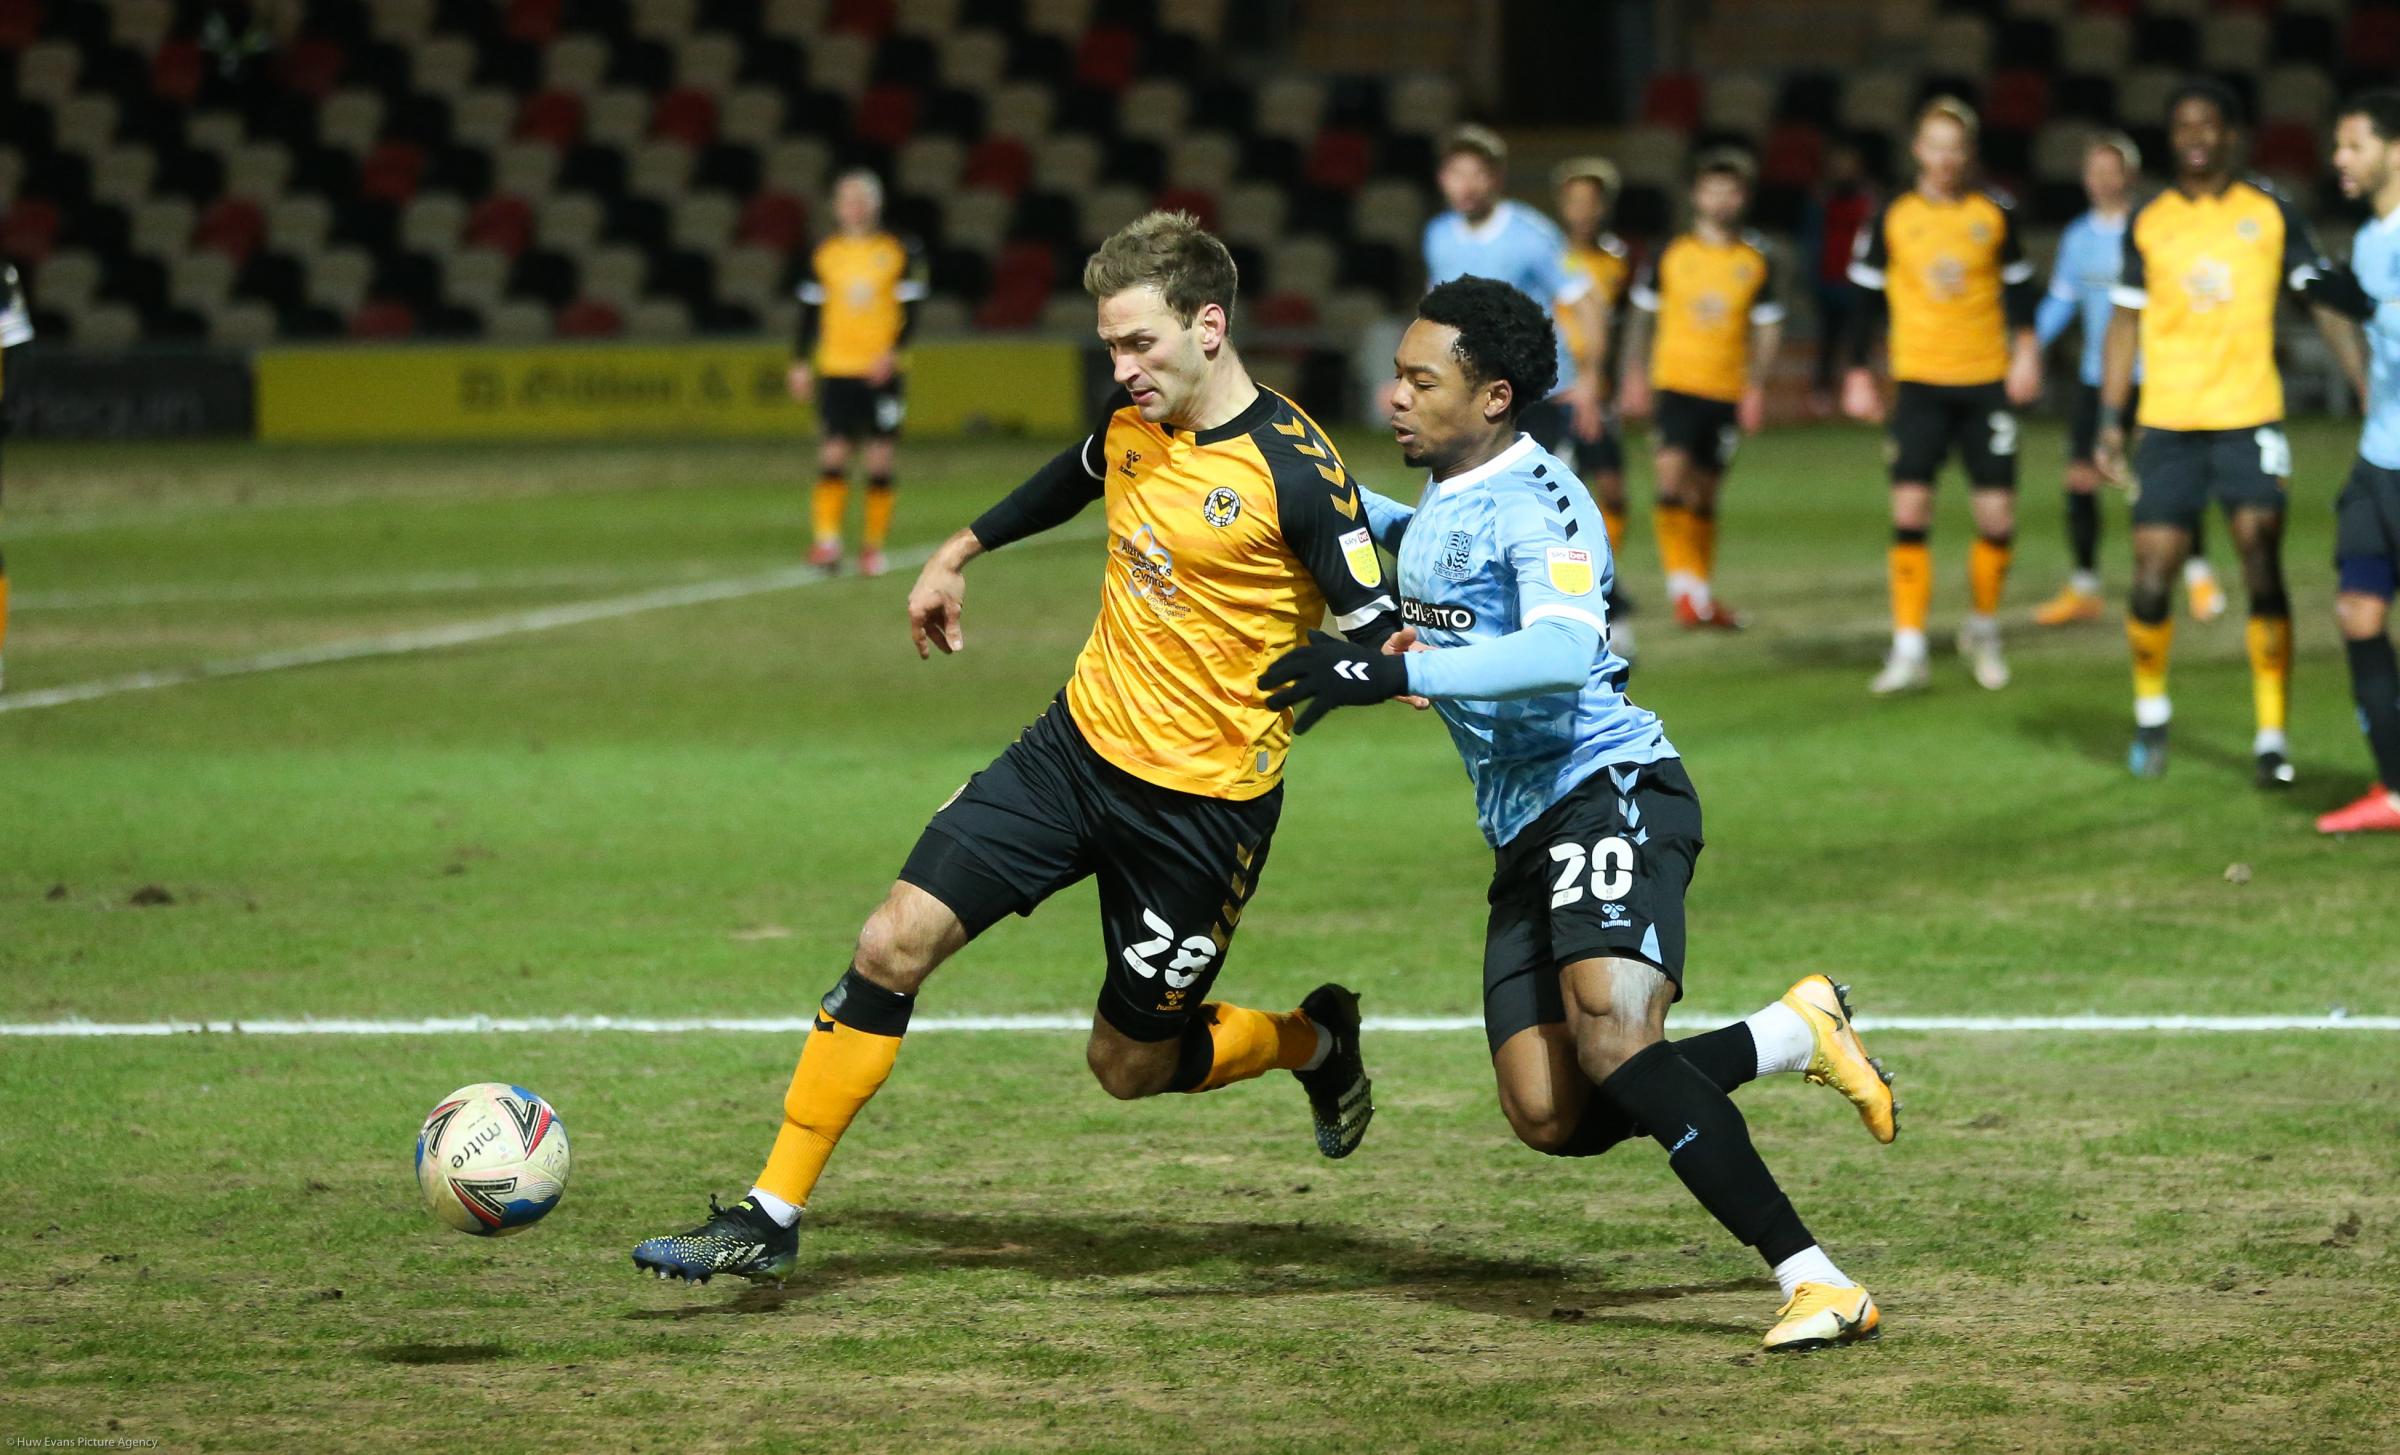 BATTLING: Mickey Demetriou in action for Newport County AFC